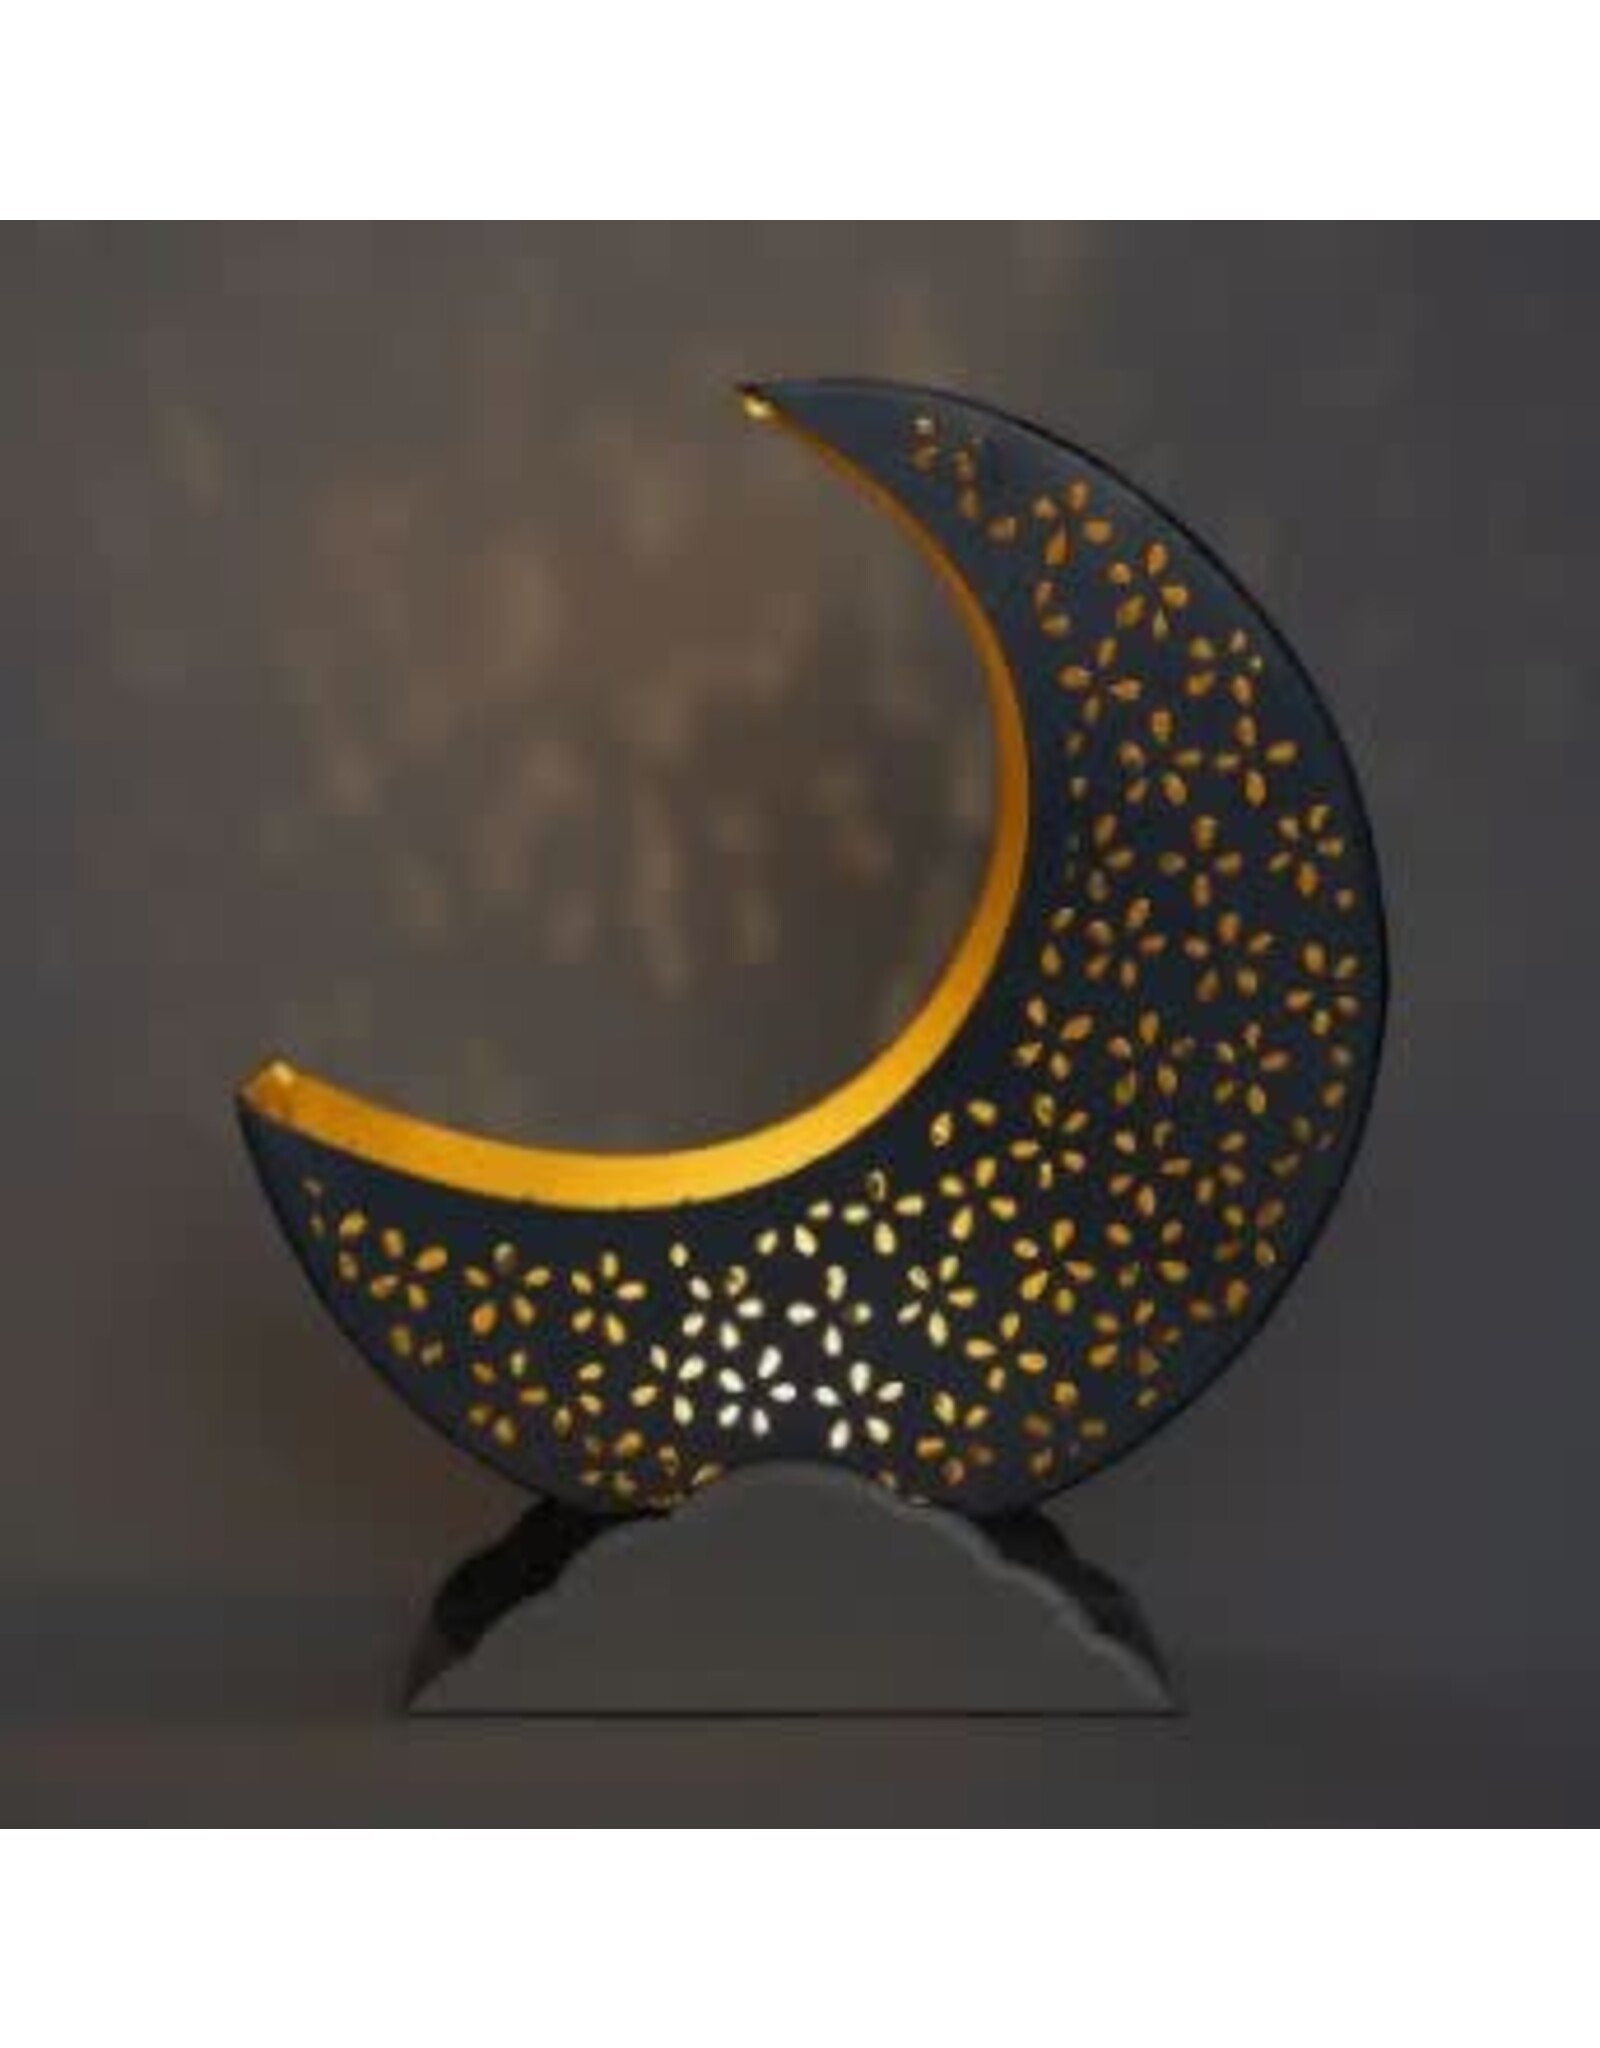 India Silver Crescent Moon Candleholder, India